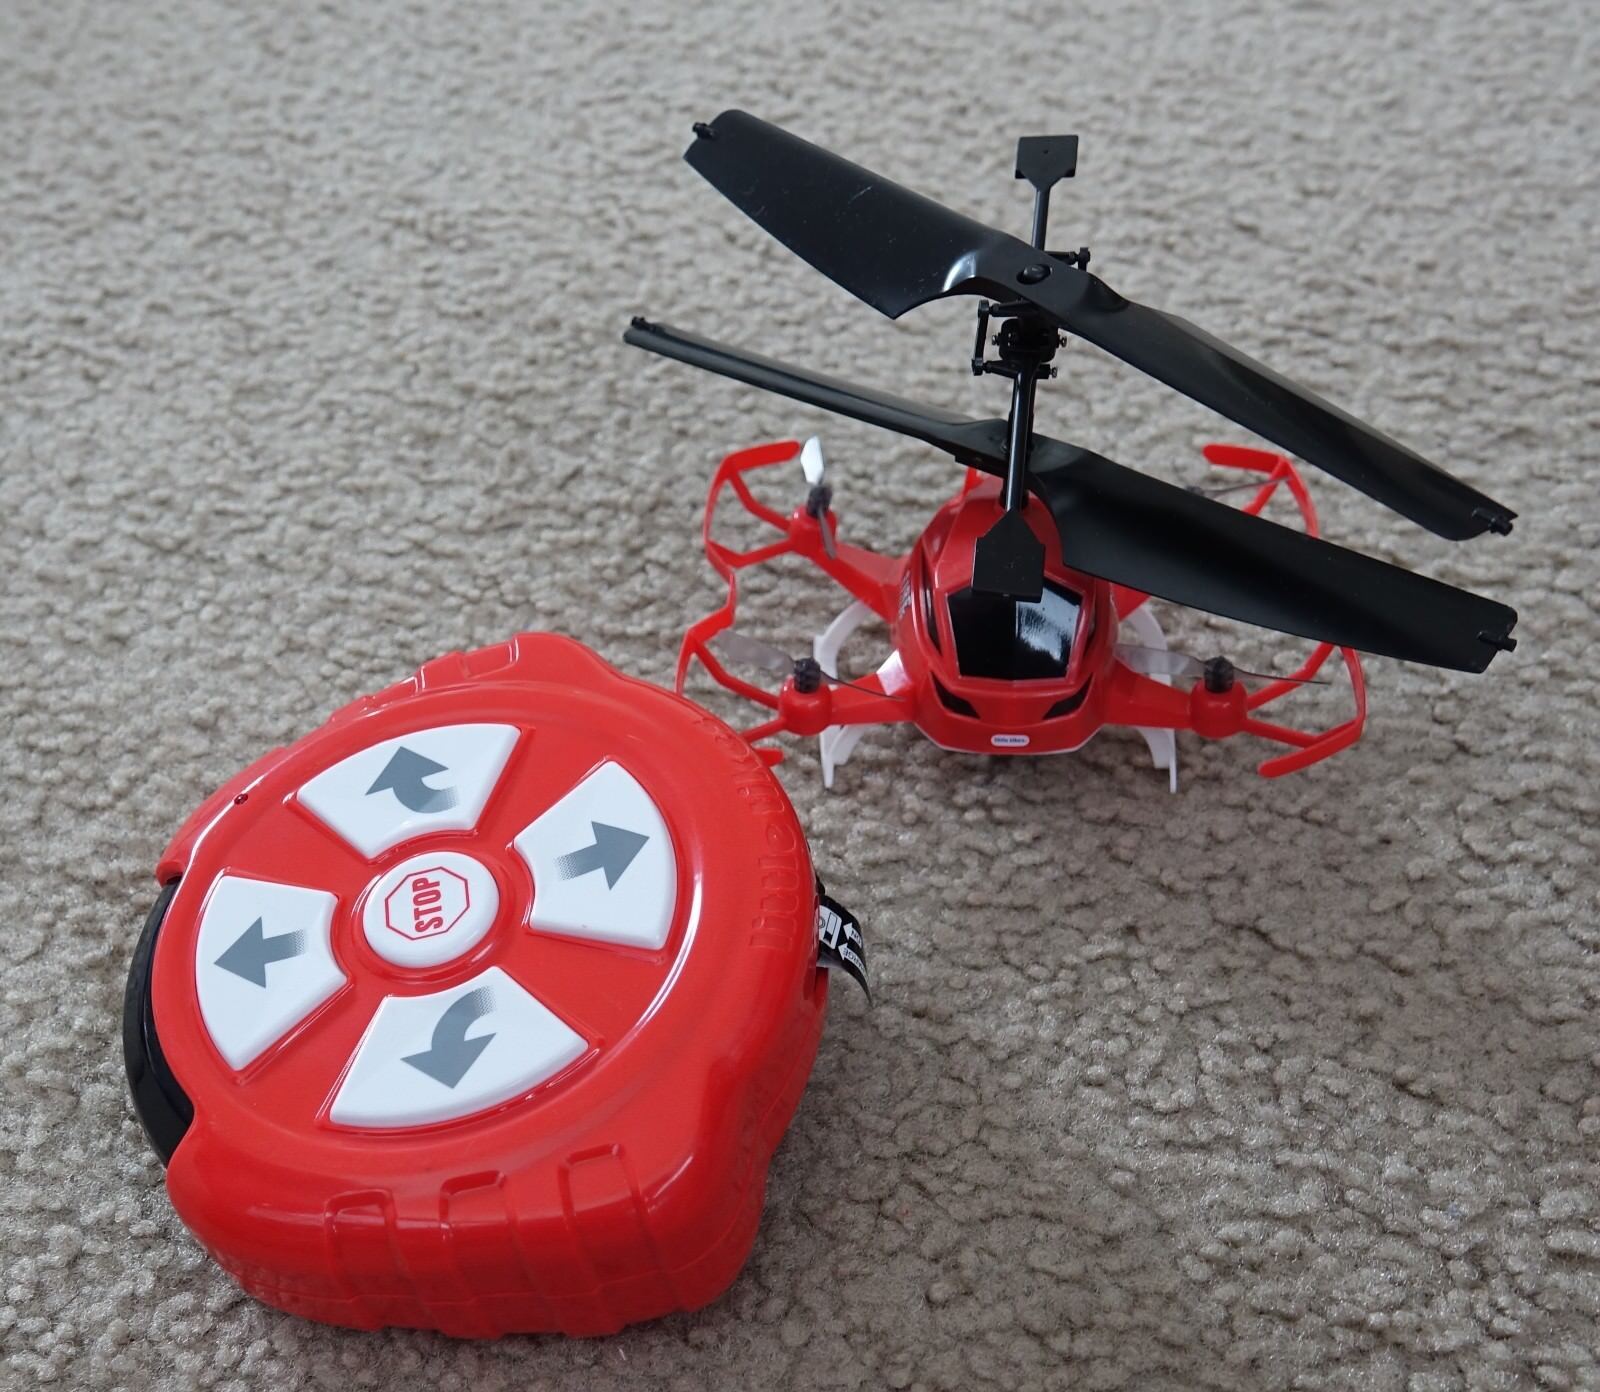 Little Tikes red fire rescue My First Drone Quadcopter,NO rings BUT flies good